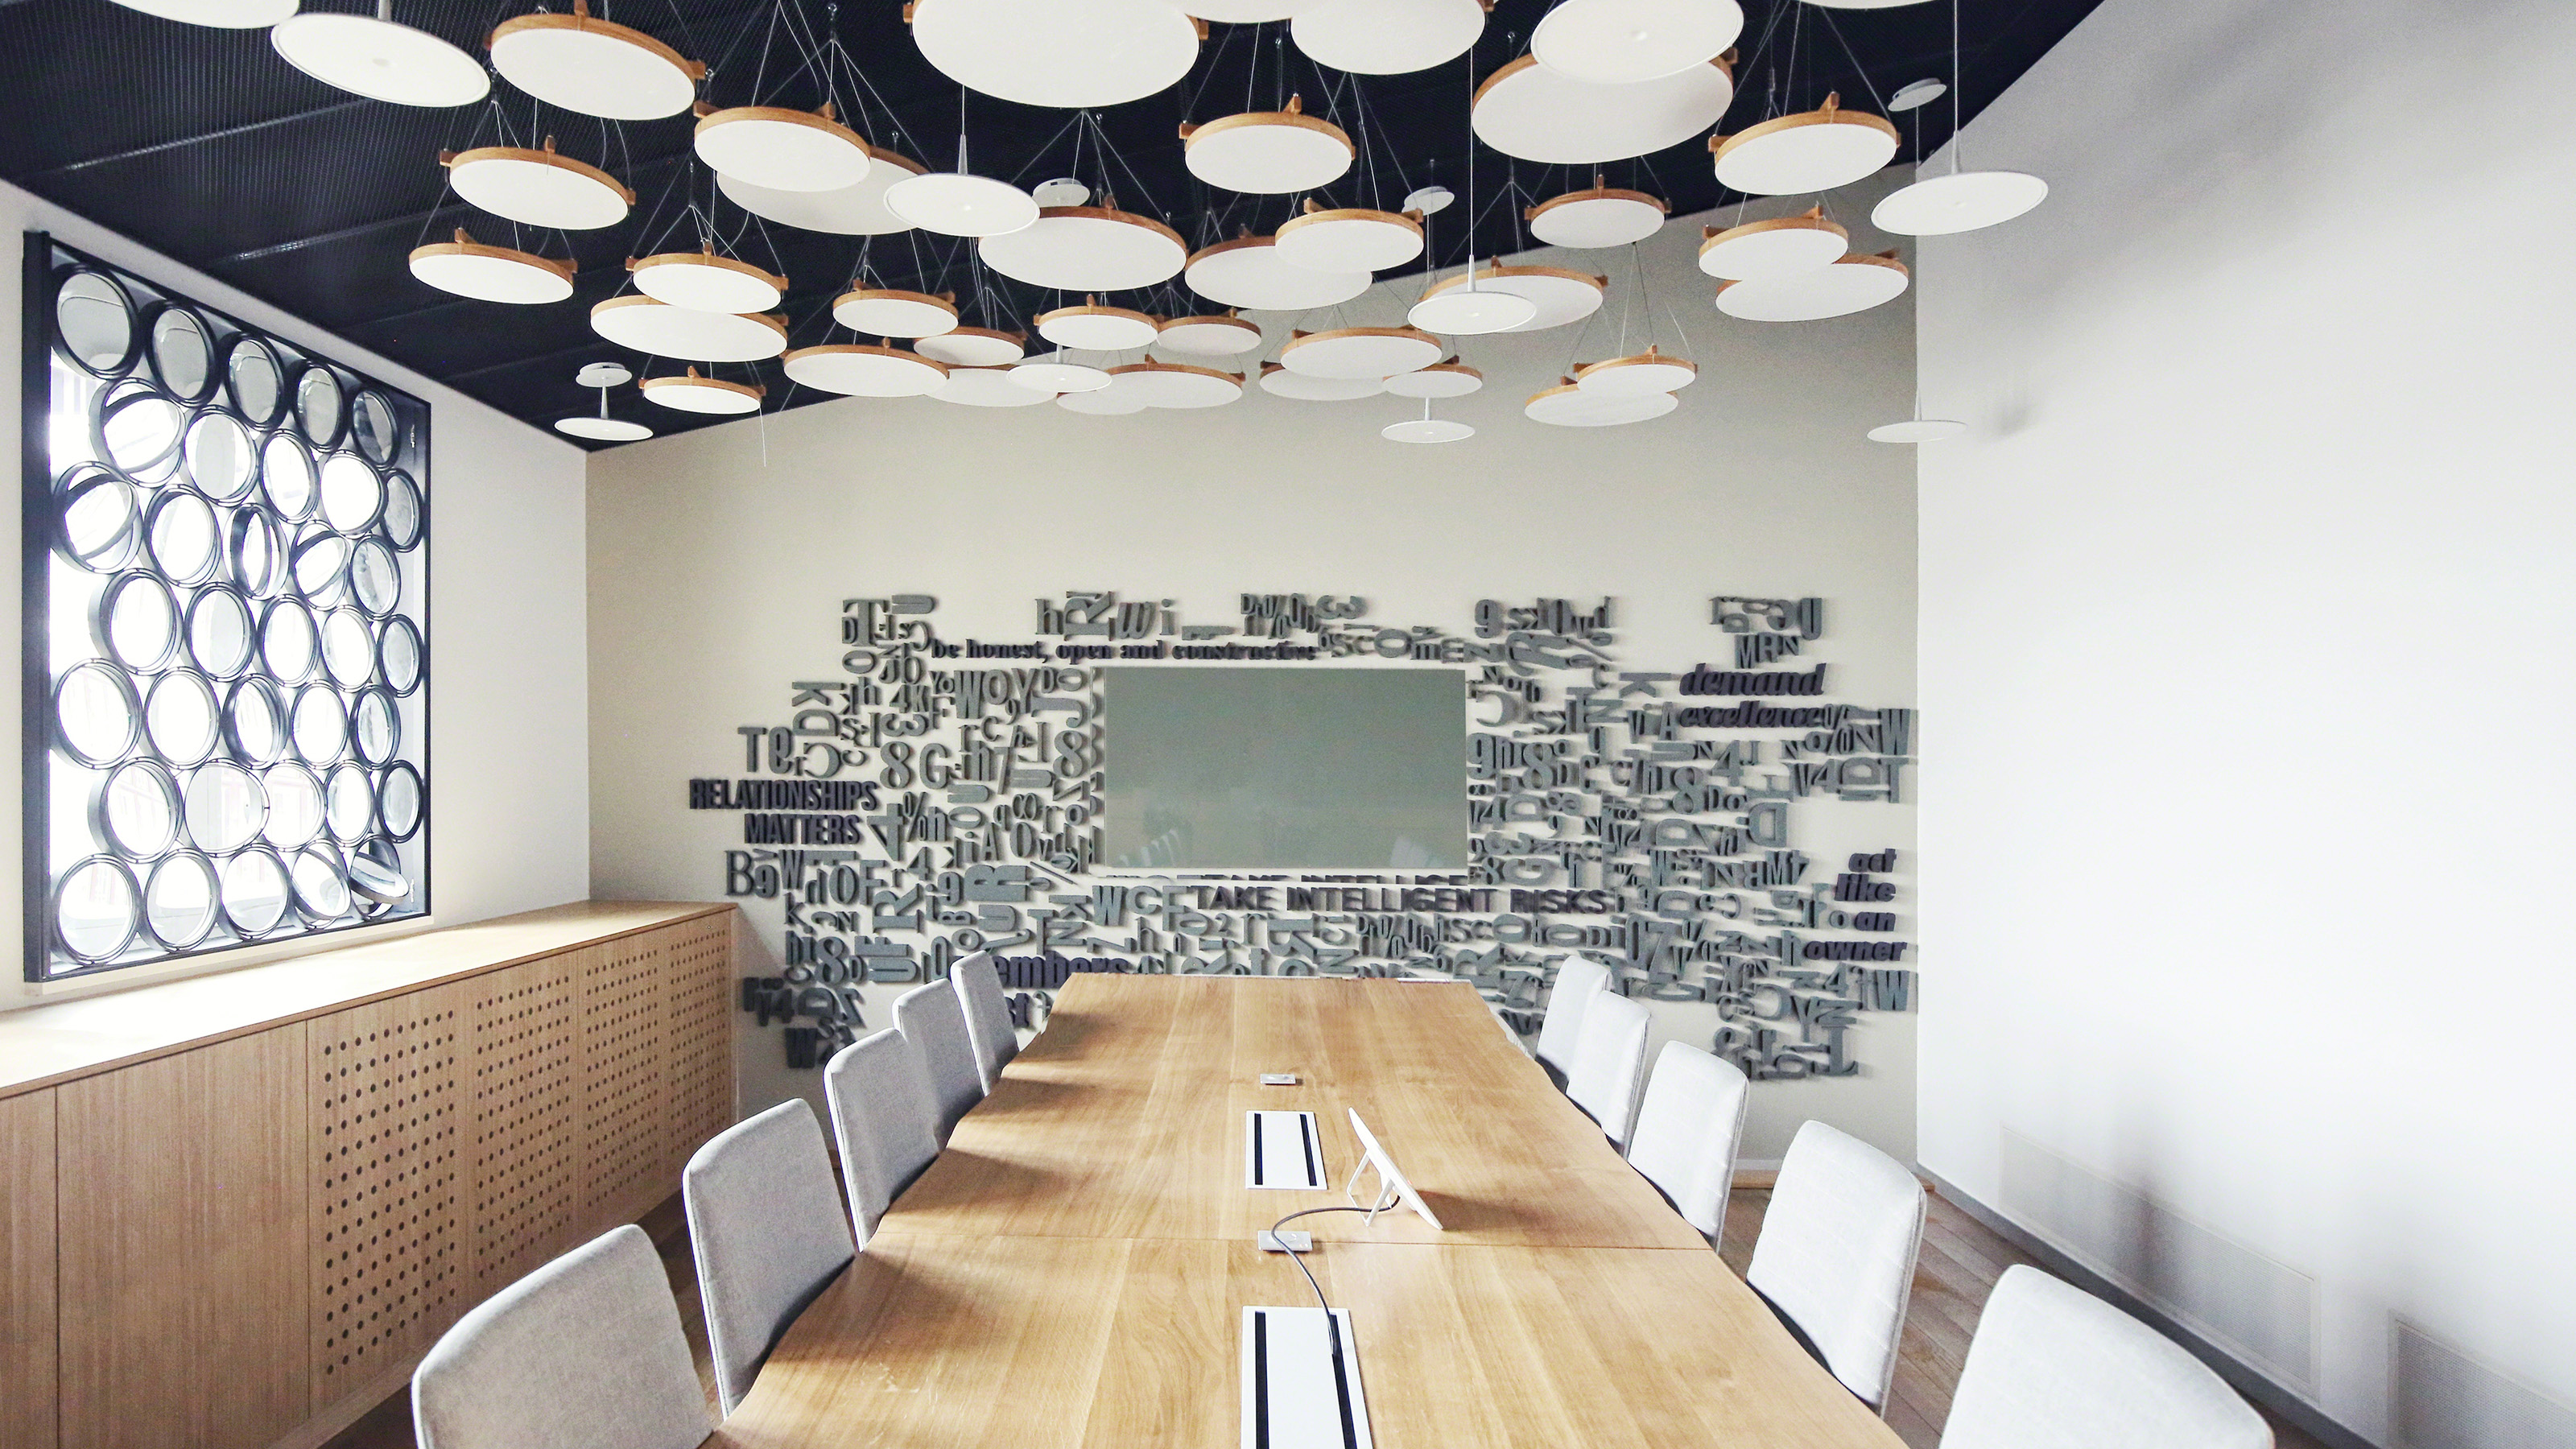 Meetings room with a large wooden table, gray chairs and words on the wall.